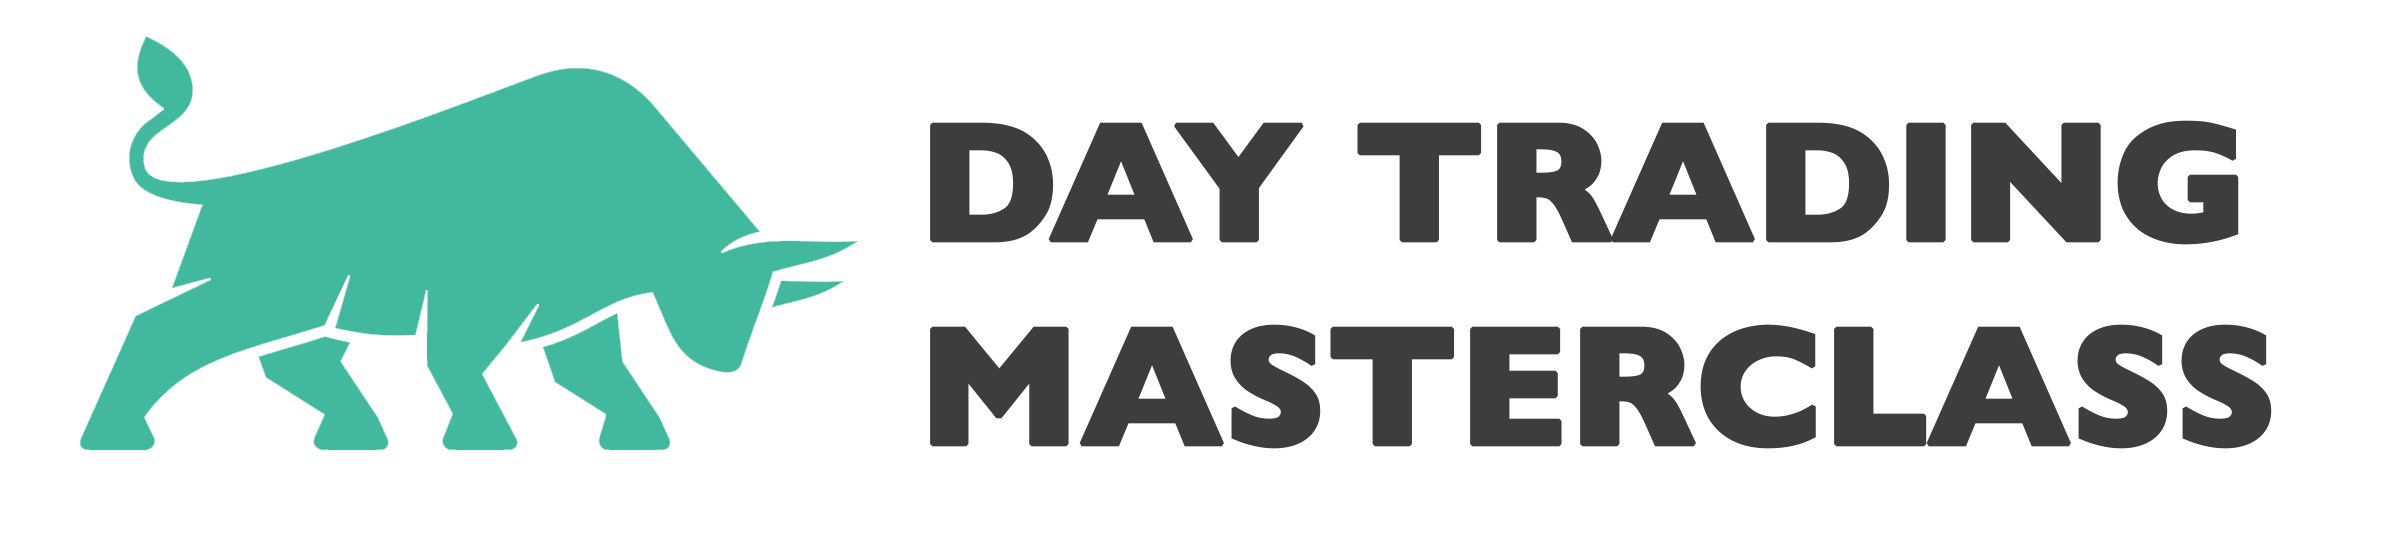 Review Day Trading Masterclass